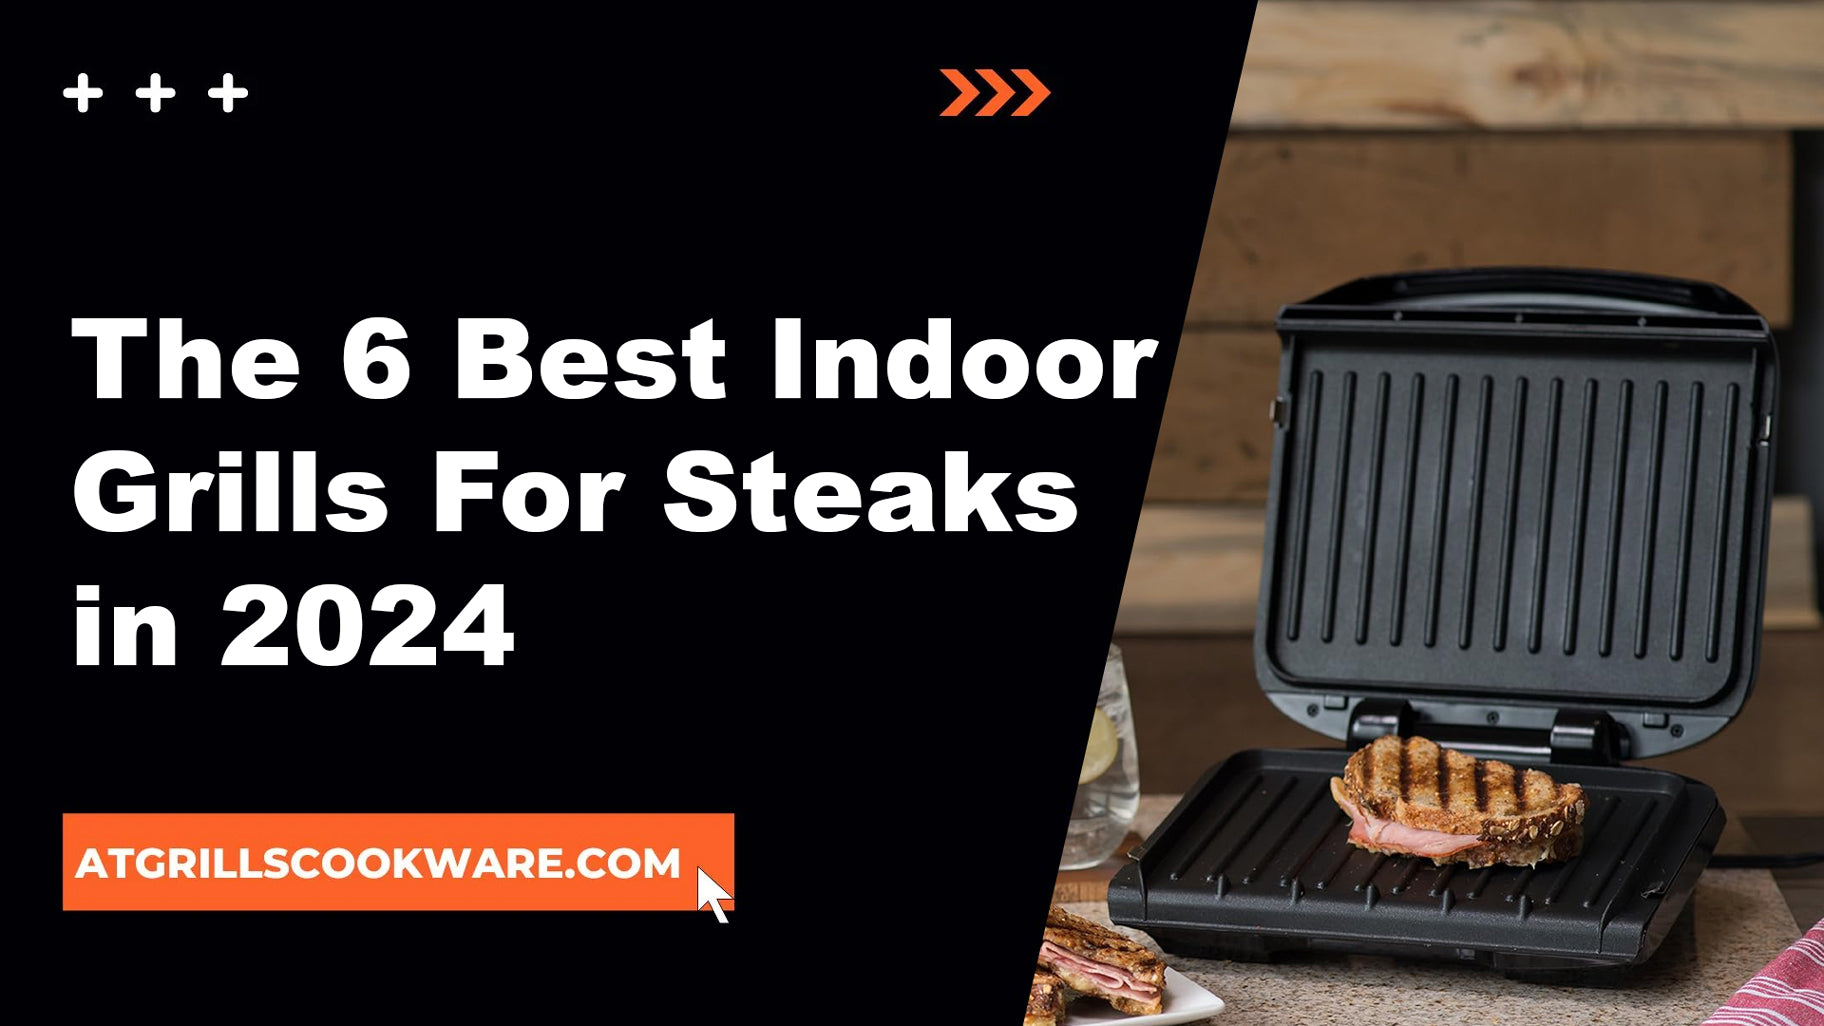 Sizzle Up a Storm: The Steak Lover’s Guide to the Top 6 Indoor Grills of 2024